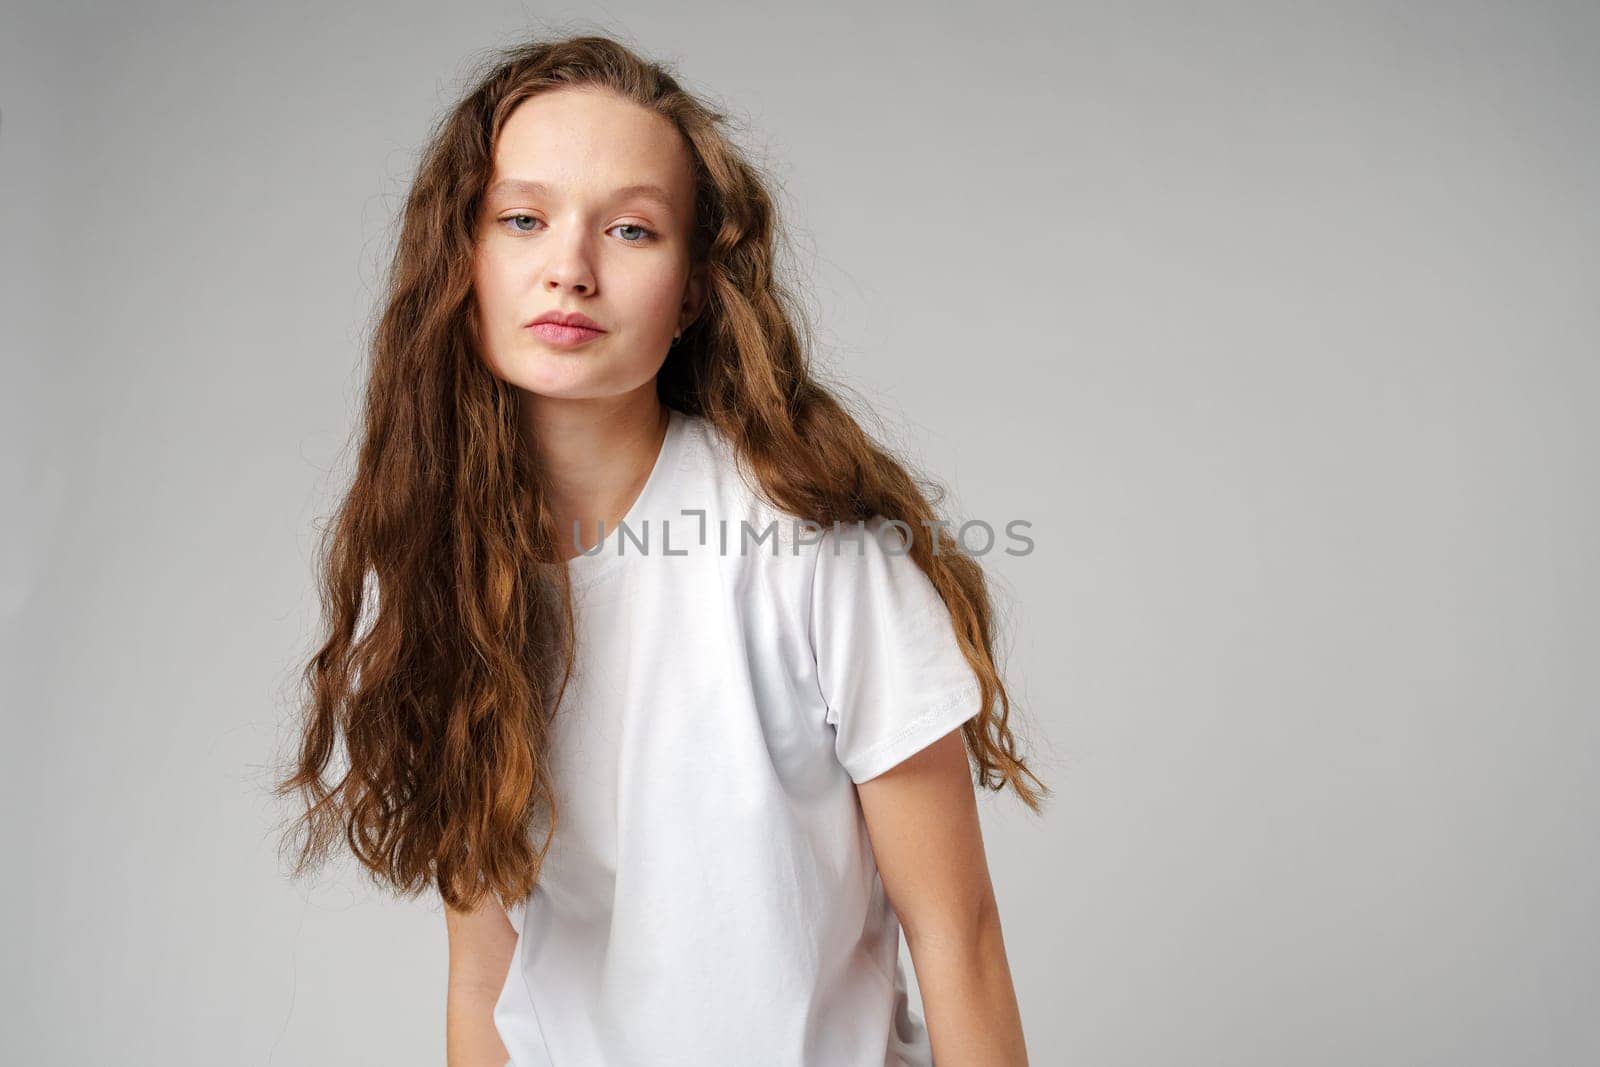 Young Girl With Long Curly Hair Portrait in studio